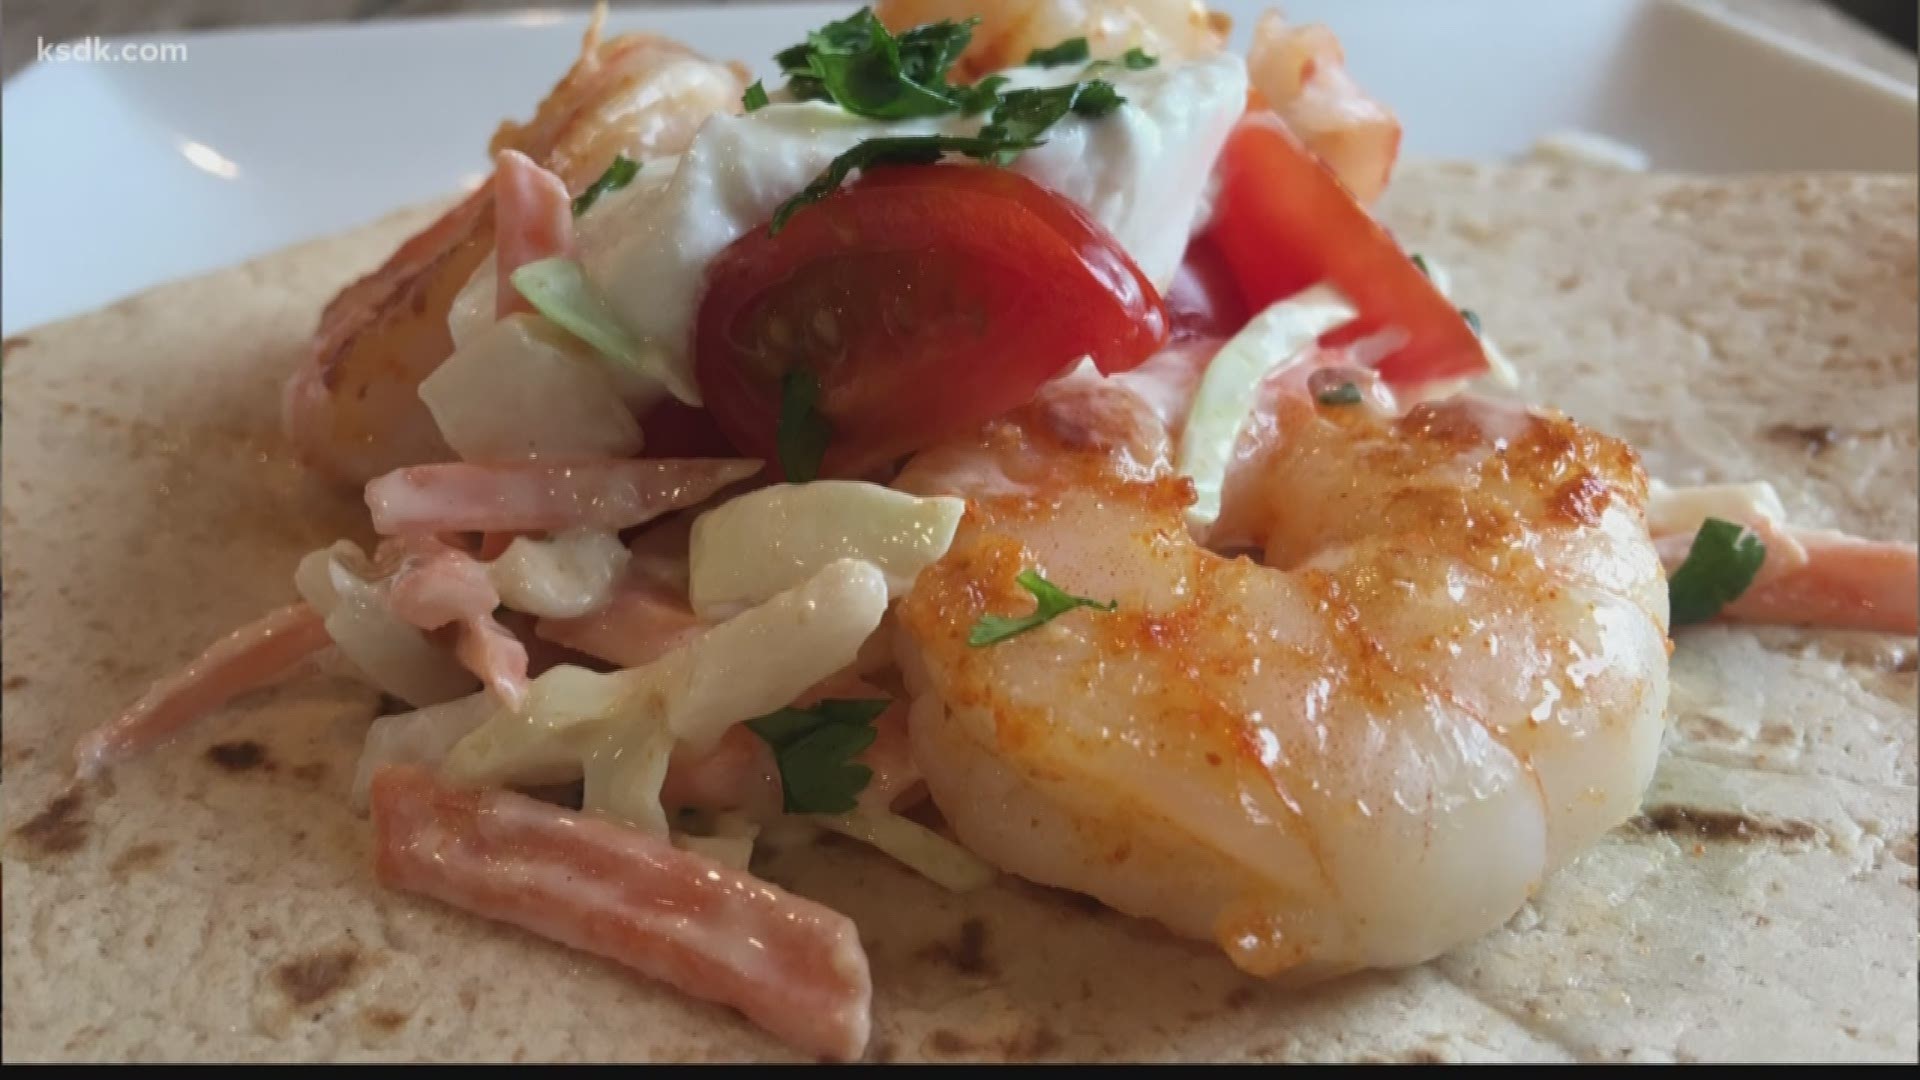 Dana Dean makes the "Taco Bout Shrimple" recipe from the Simply Schnucks Magazine.